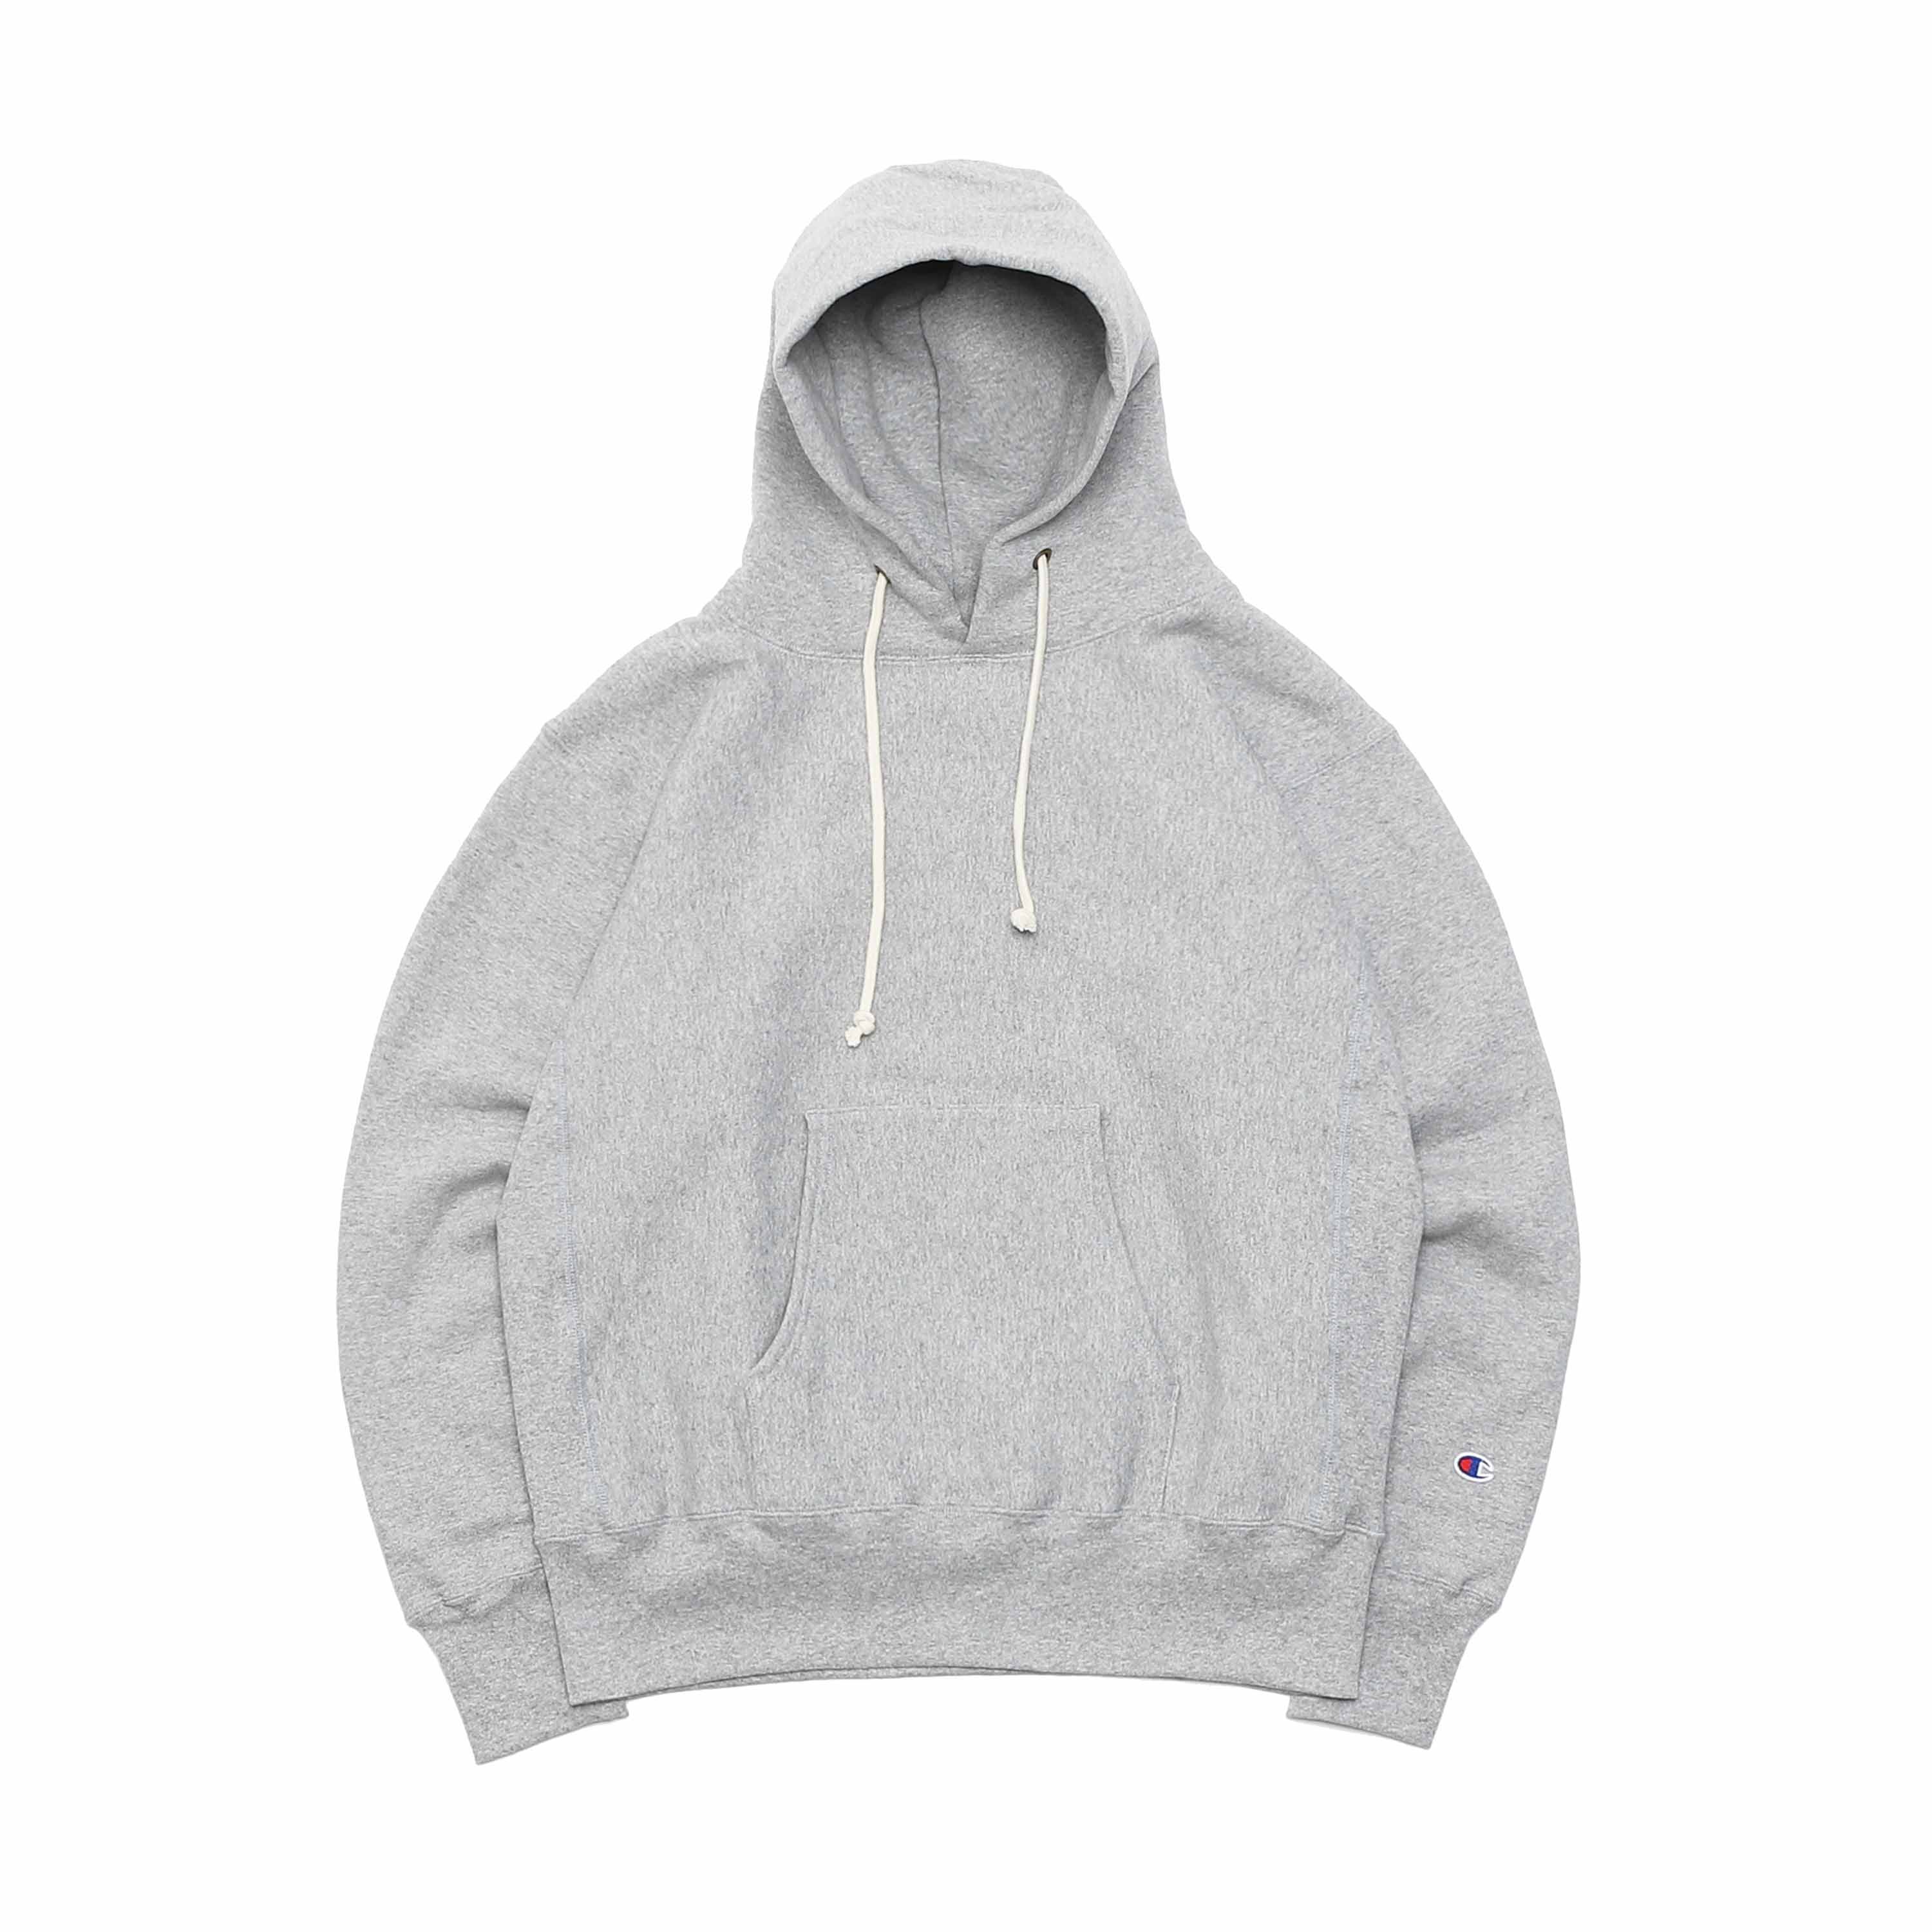 RW PULLOVER HOODED SWEATSHIRT(RED TAG) - S.GREY